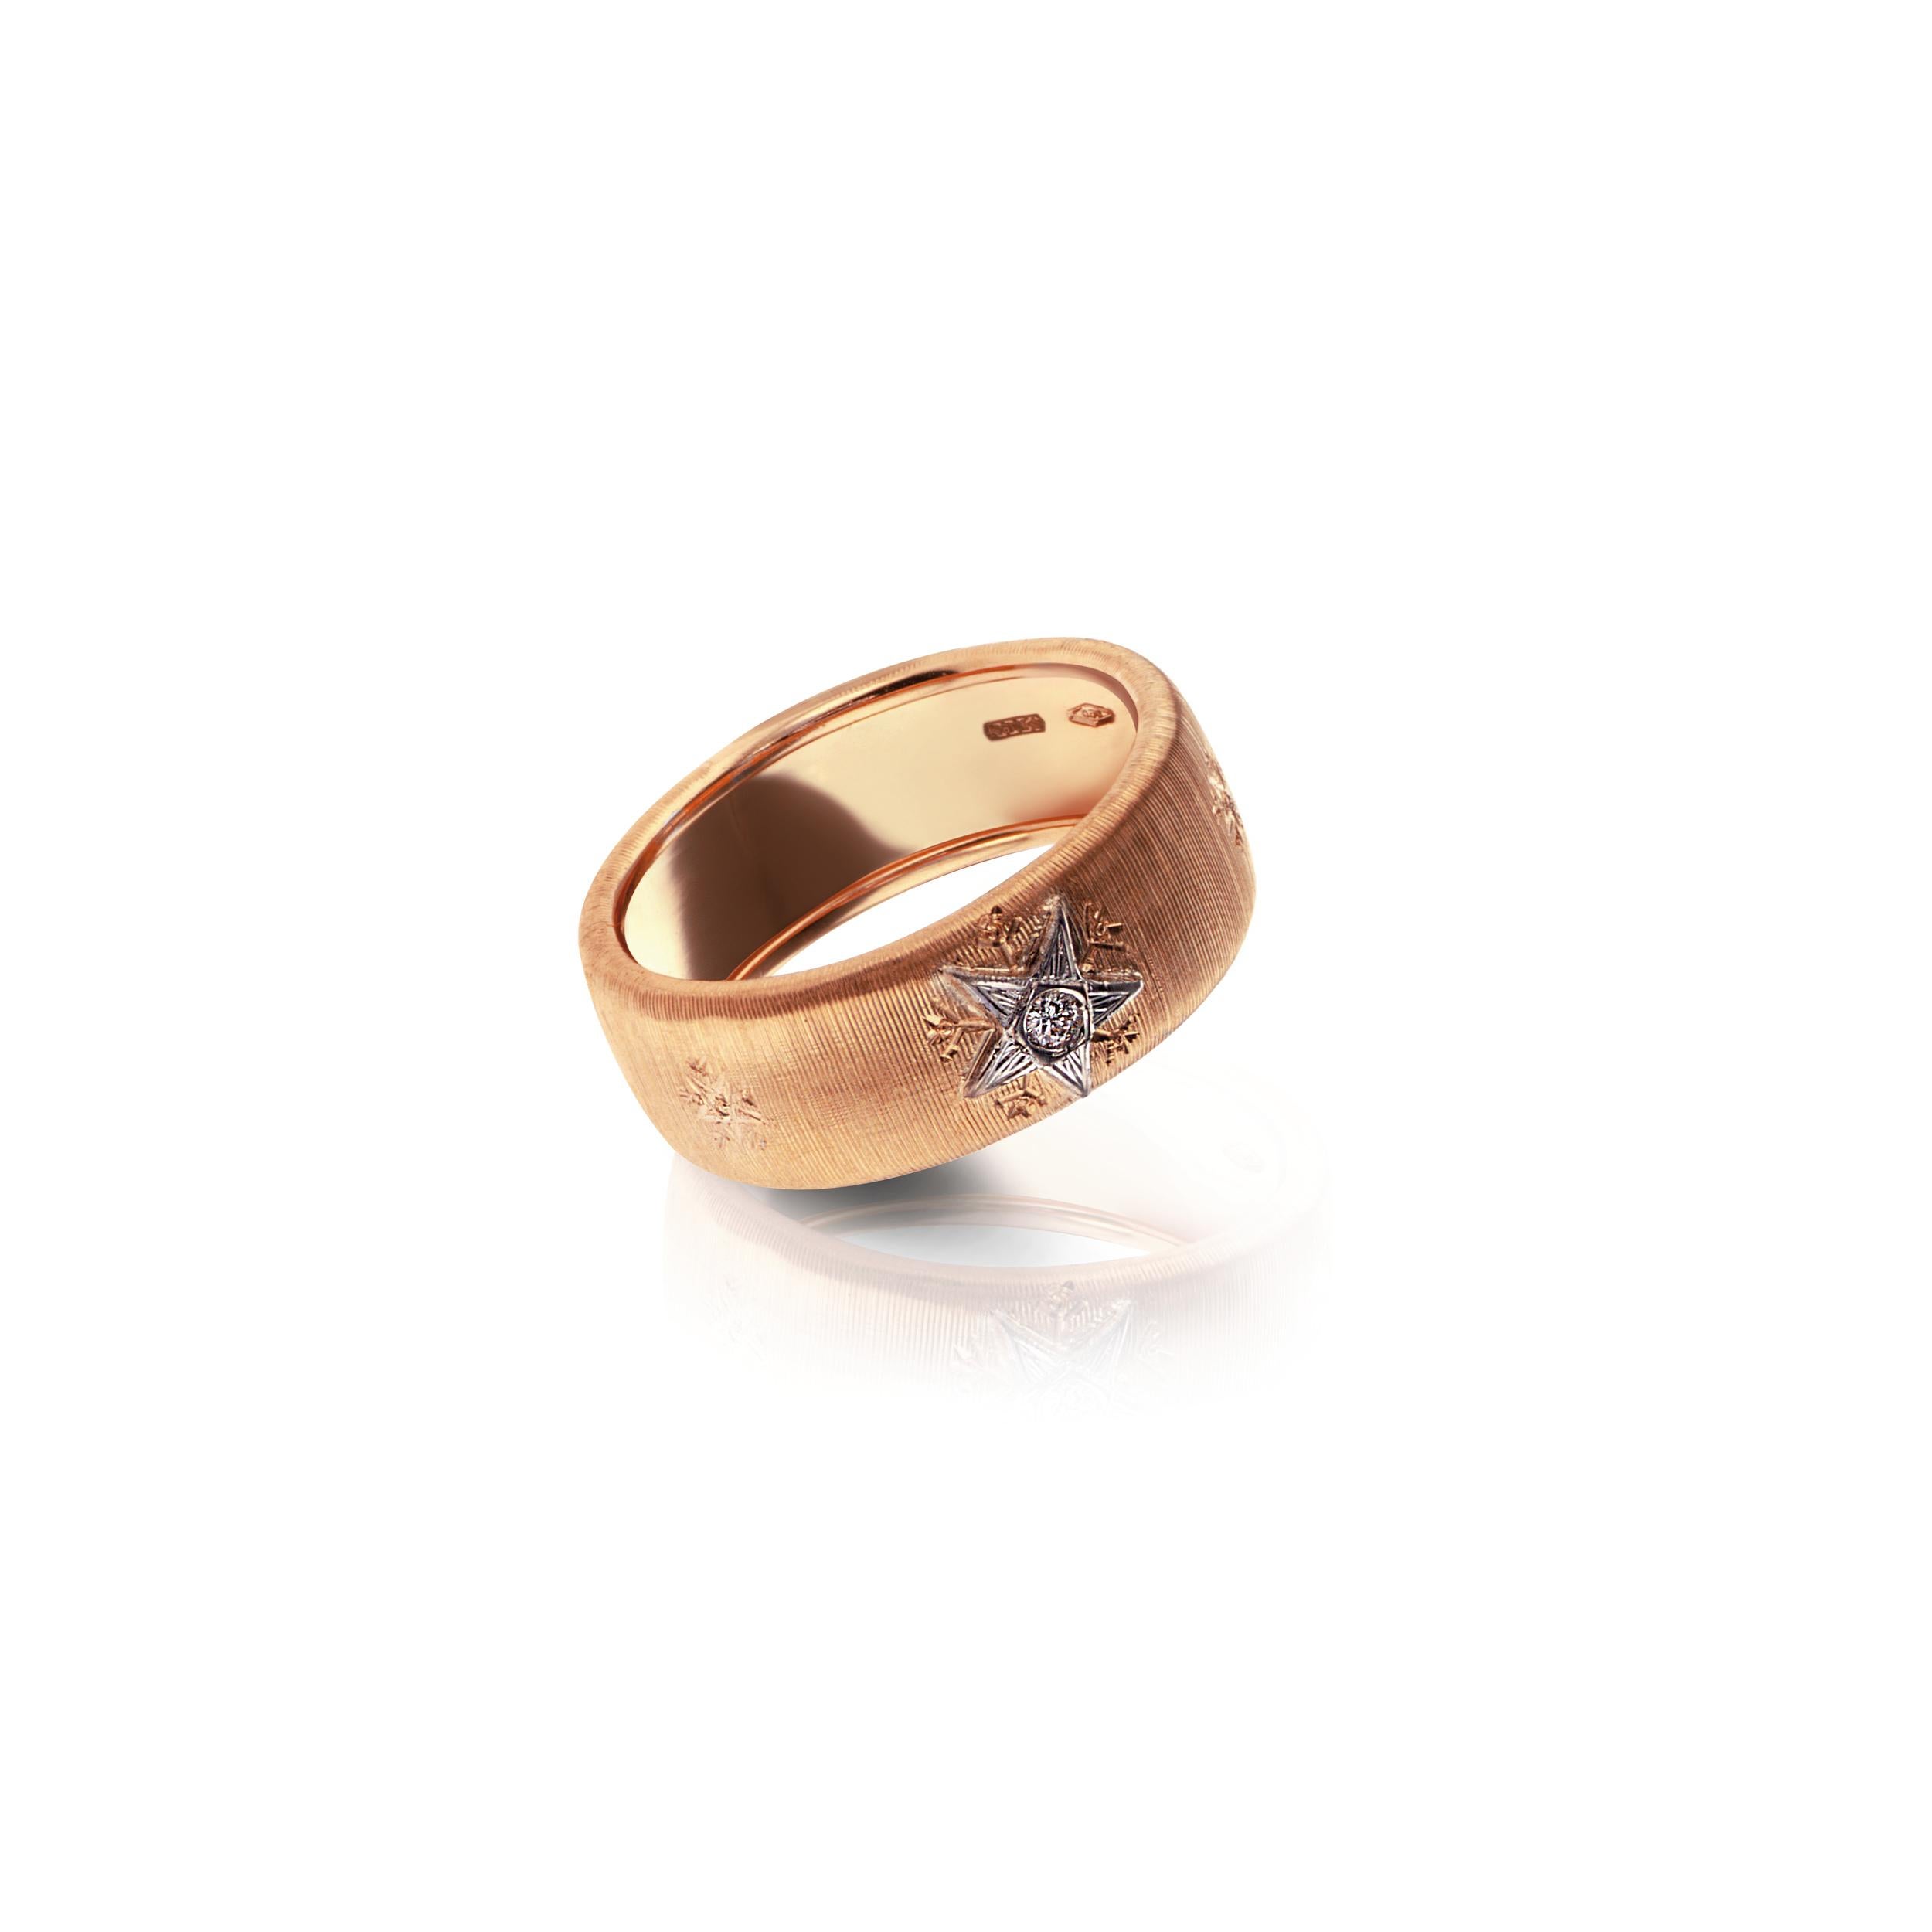 This 18kt Rose Gold Diamond Caterina Band ring was designed and inspired by Leonardo da Vinci's architectural drawings, and incorporates the patented Leonardo da Vinci Cut diamond which are sprinkled within. 

The design boasts 1 white Gold star on